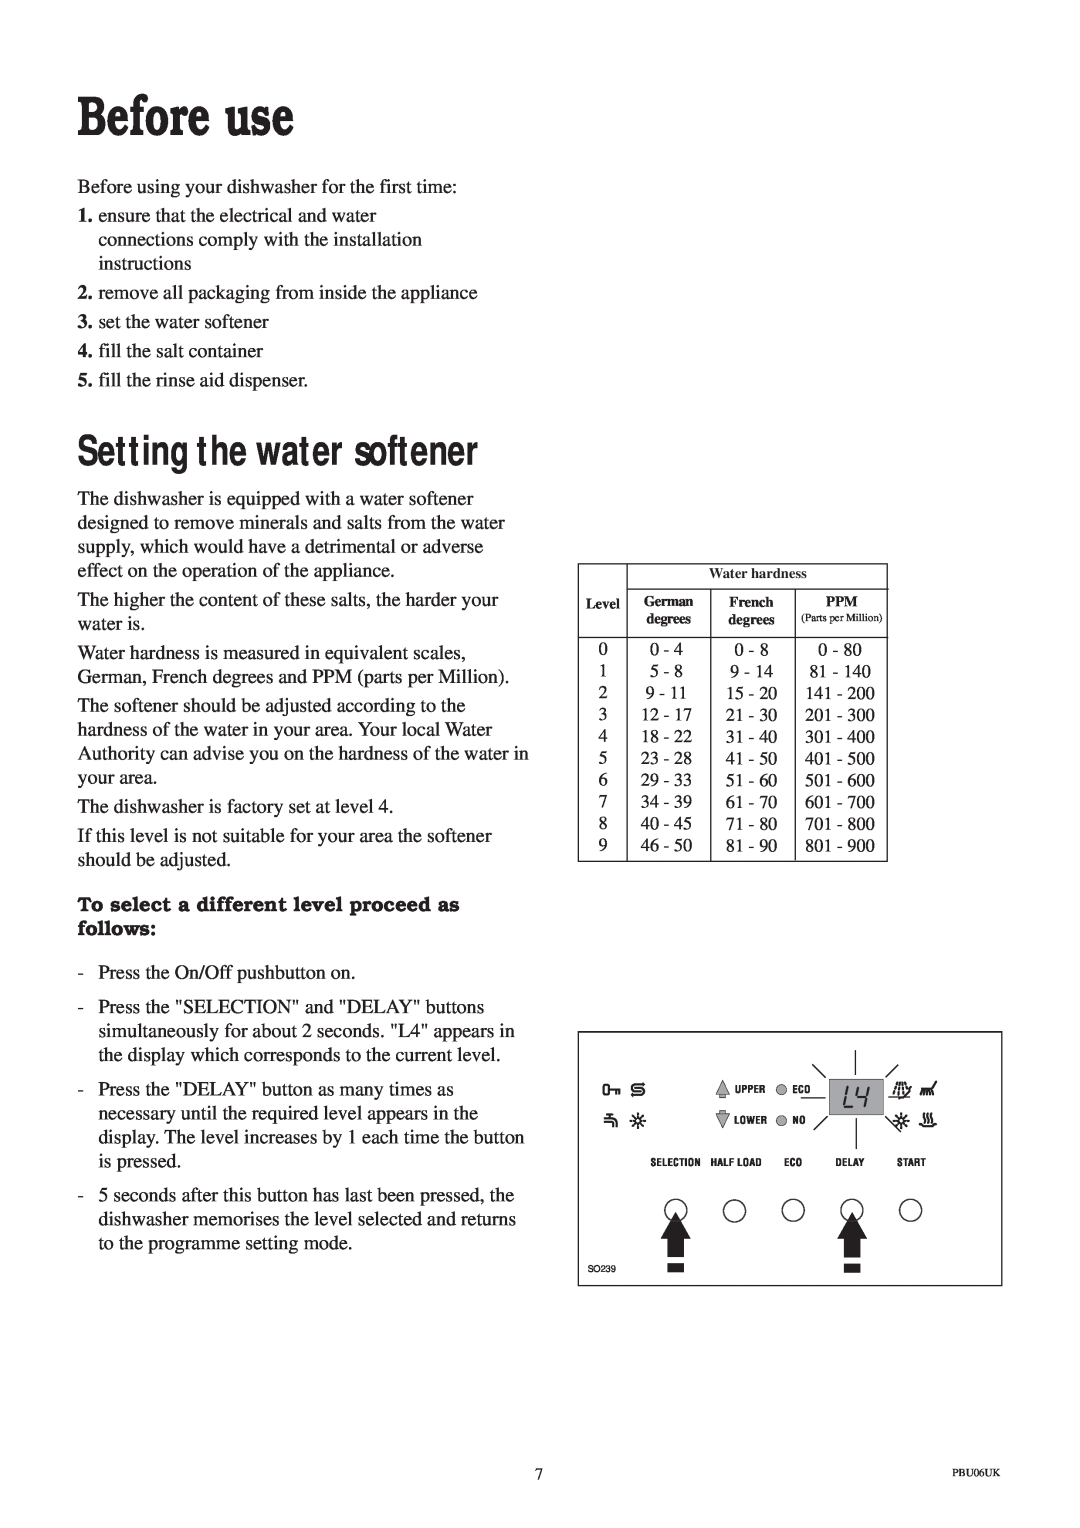 Zanussi ZDS 689 EX manual Before use, Setting the water softener, To select a different level proceed as follows 